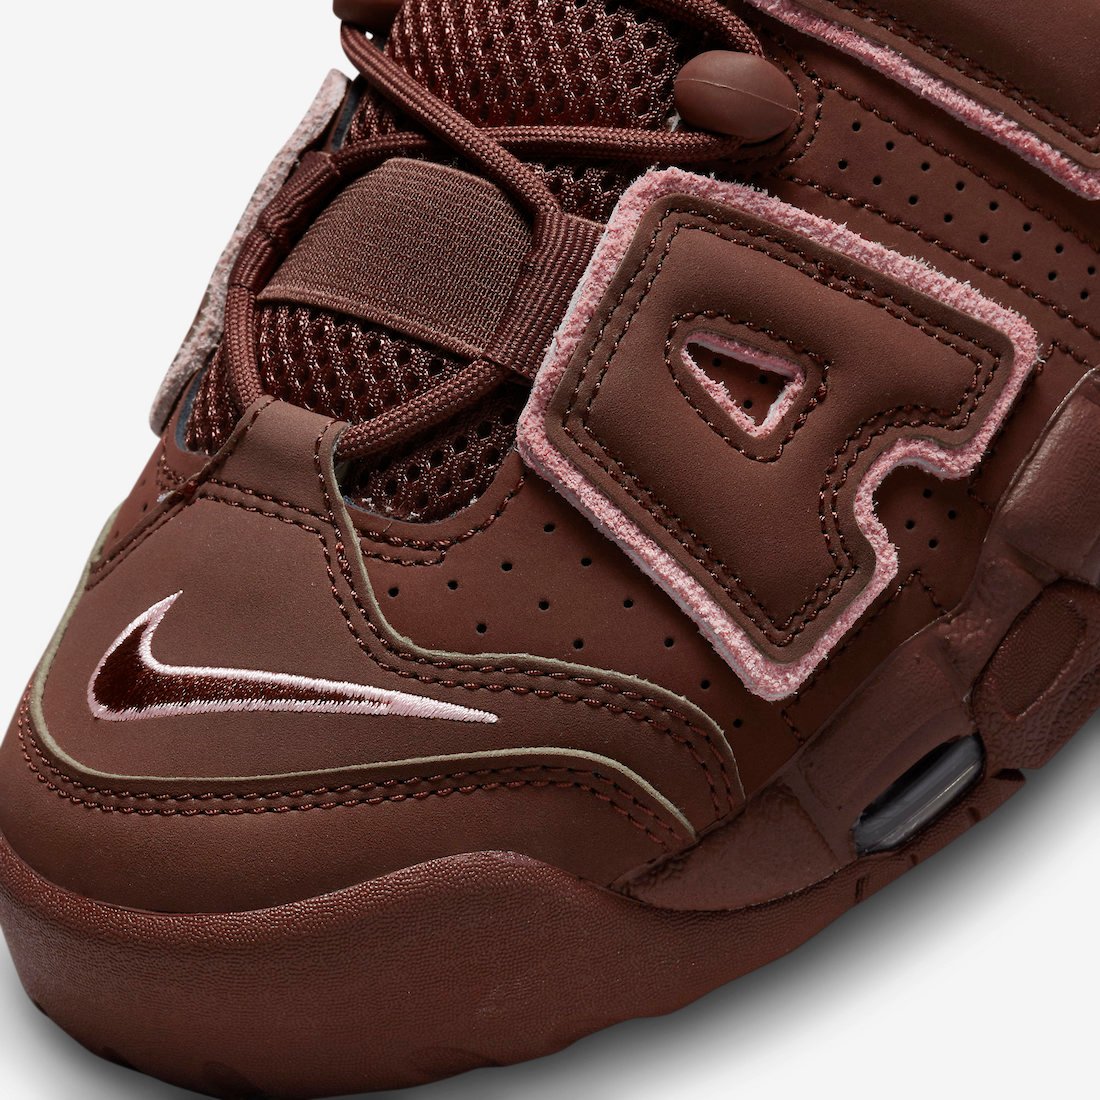 Nike Air More Uptempo Valentines Day DV3466-200 Release Date Info